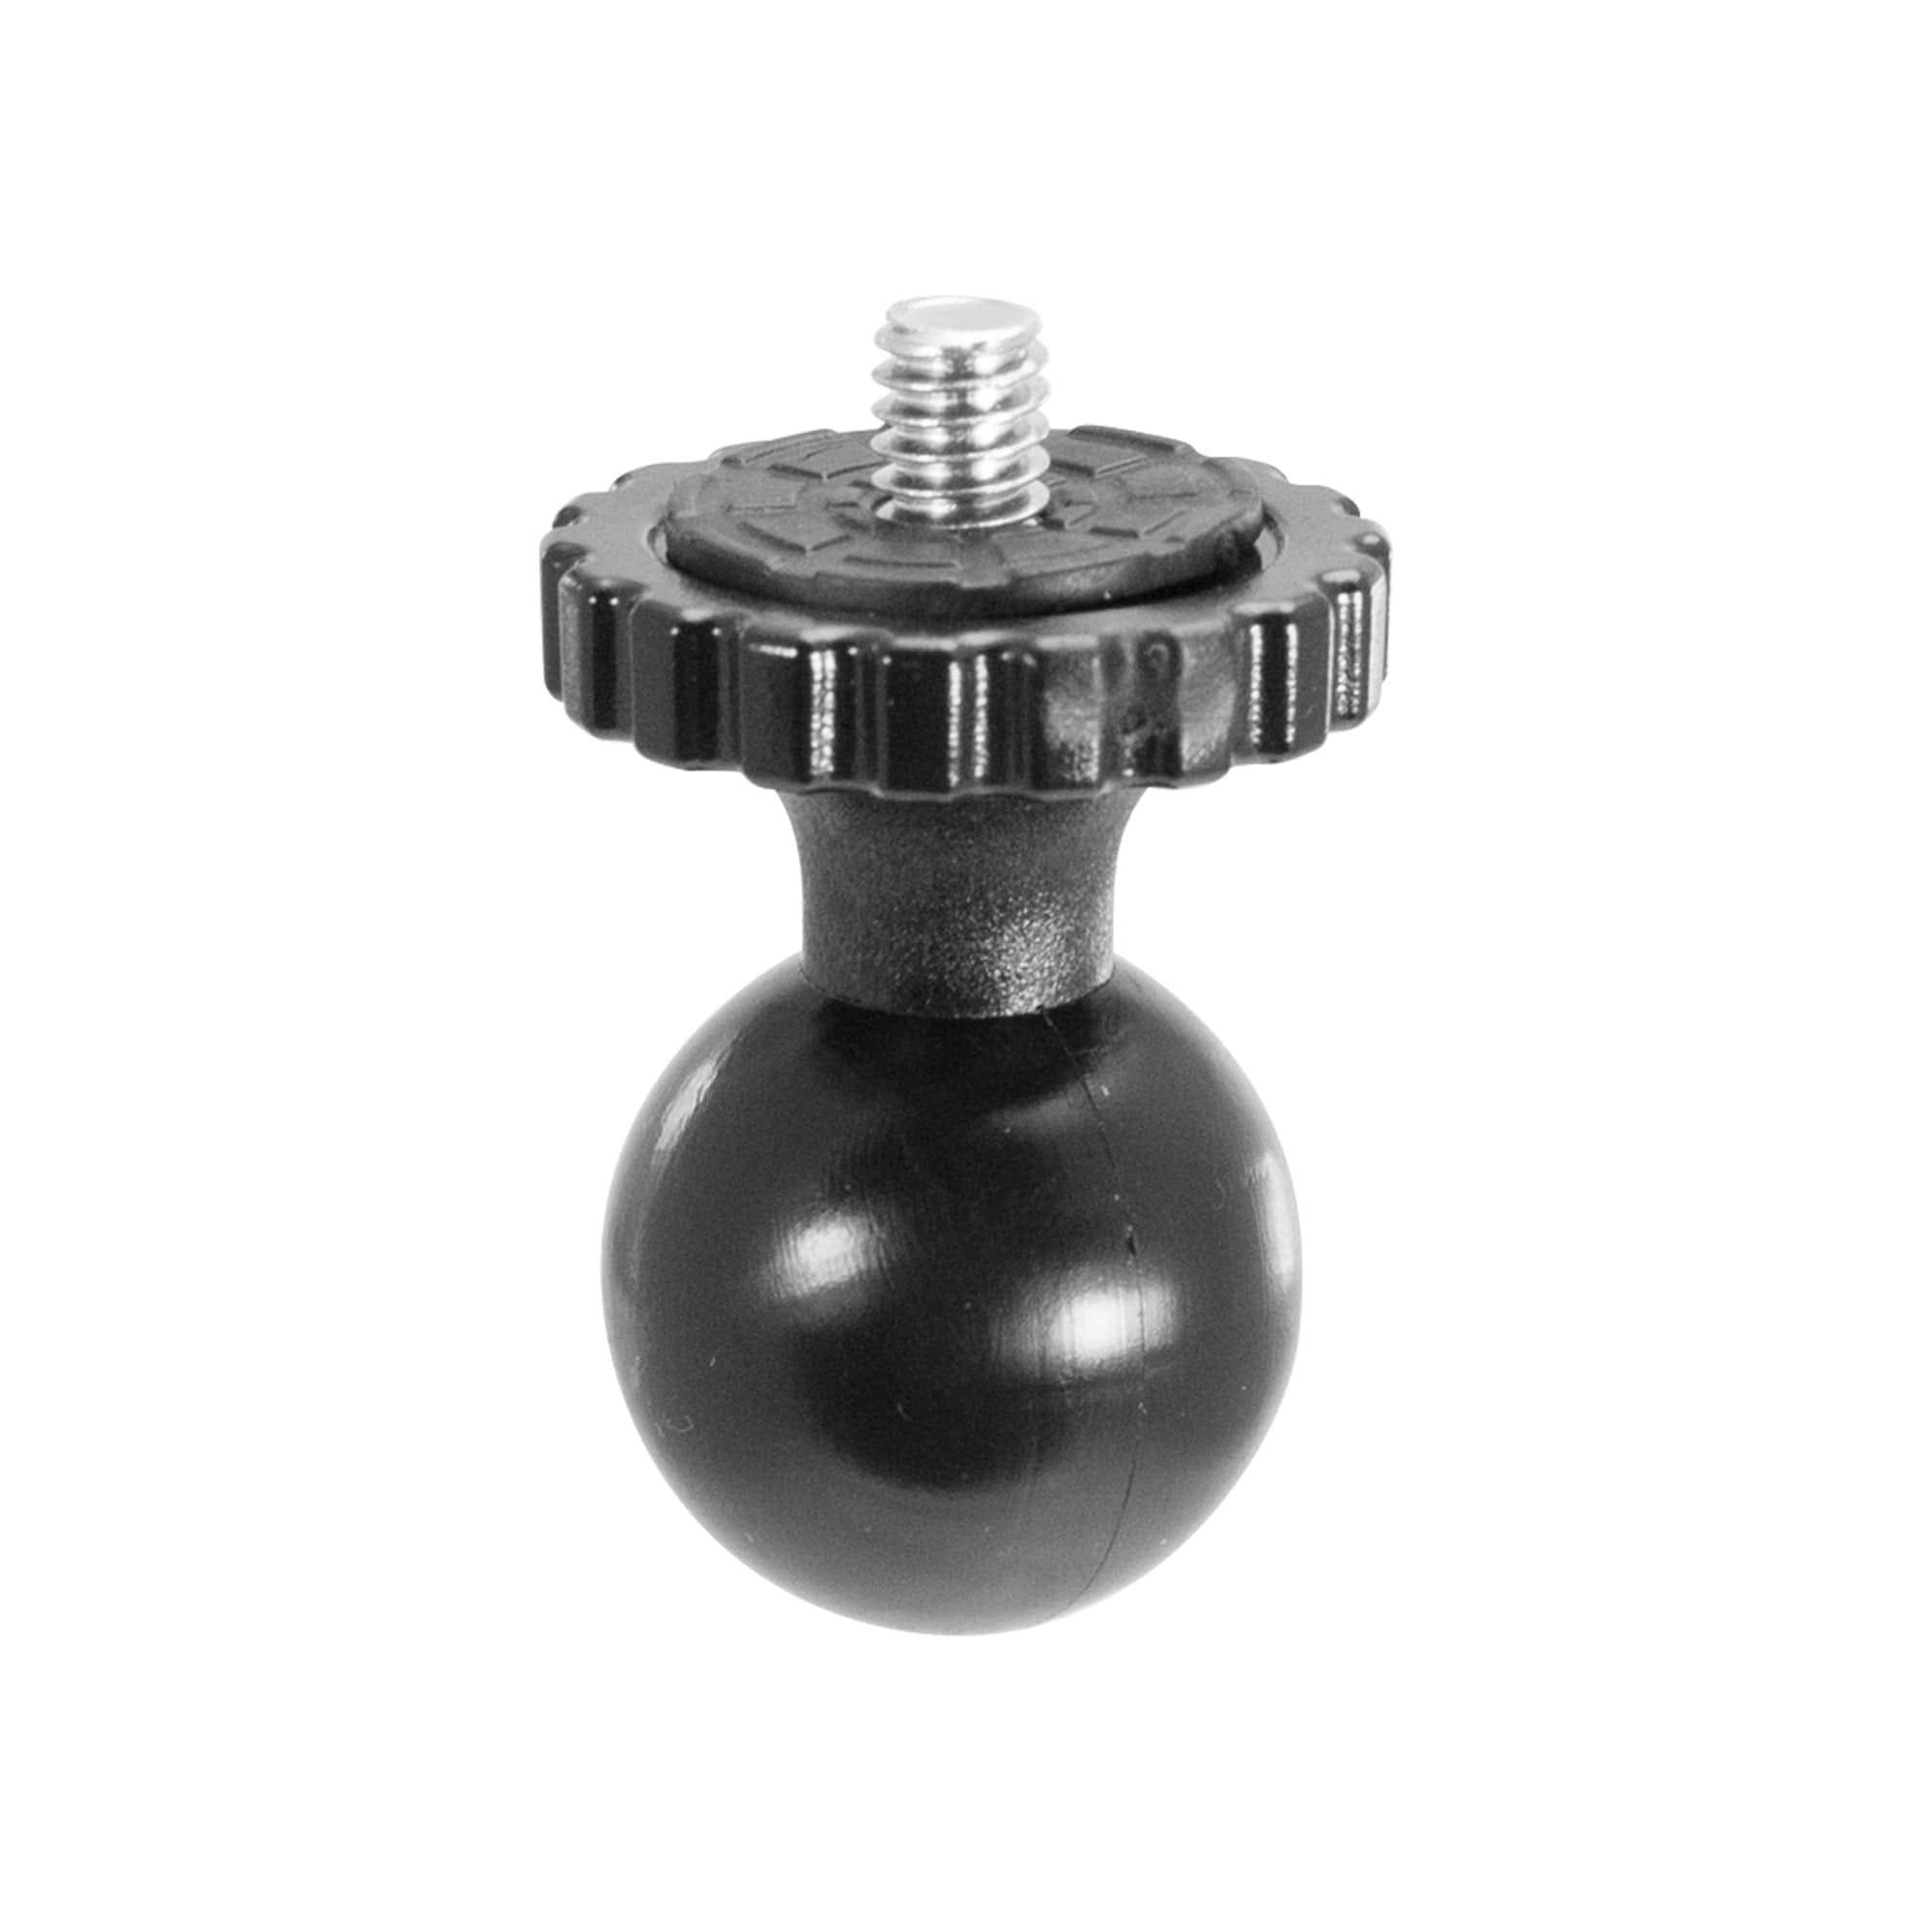 iBOLT Action Camera / ¼ inch 20 to 25mm / 1 inch/B Size Ball Adapter